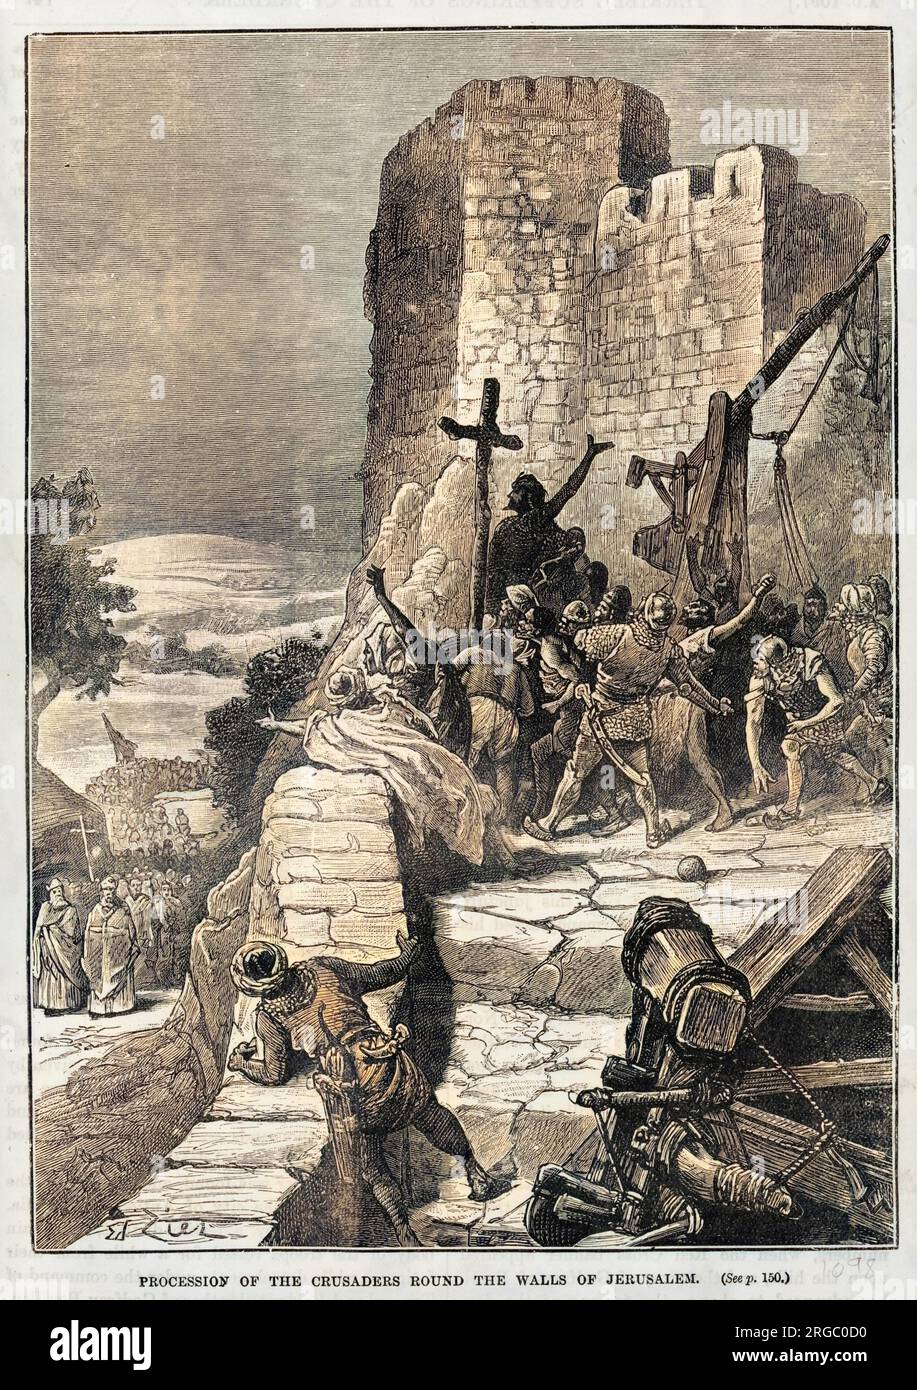 FIRST CRUSADE The victorious Crusaders process round Jerusalem, after massacring the defenders till the streets were filled with corpses Stock Photo